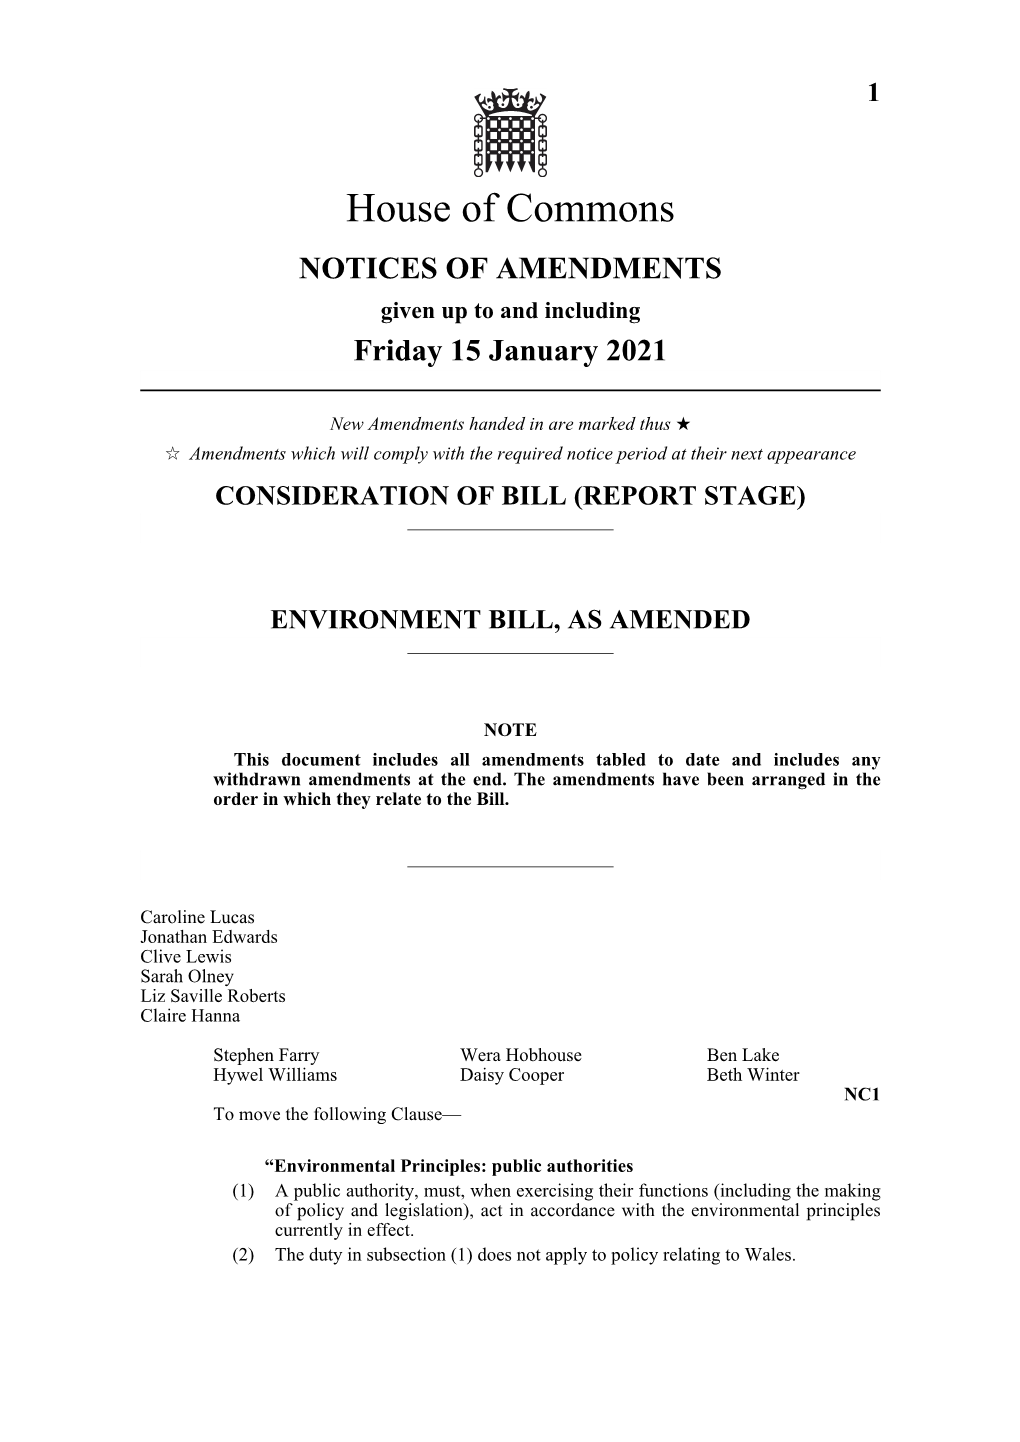 AMENDMENTS Given up to and Including Friday 15 January 2021